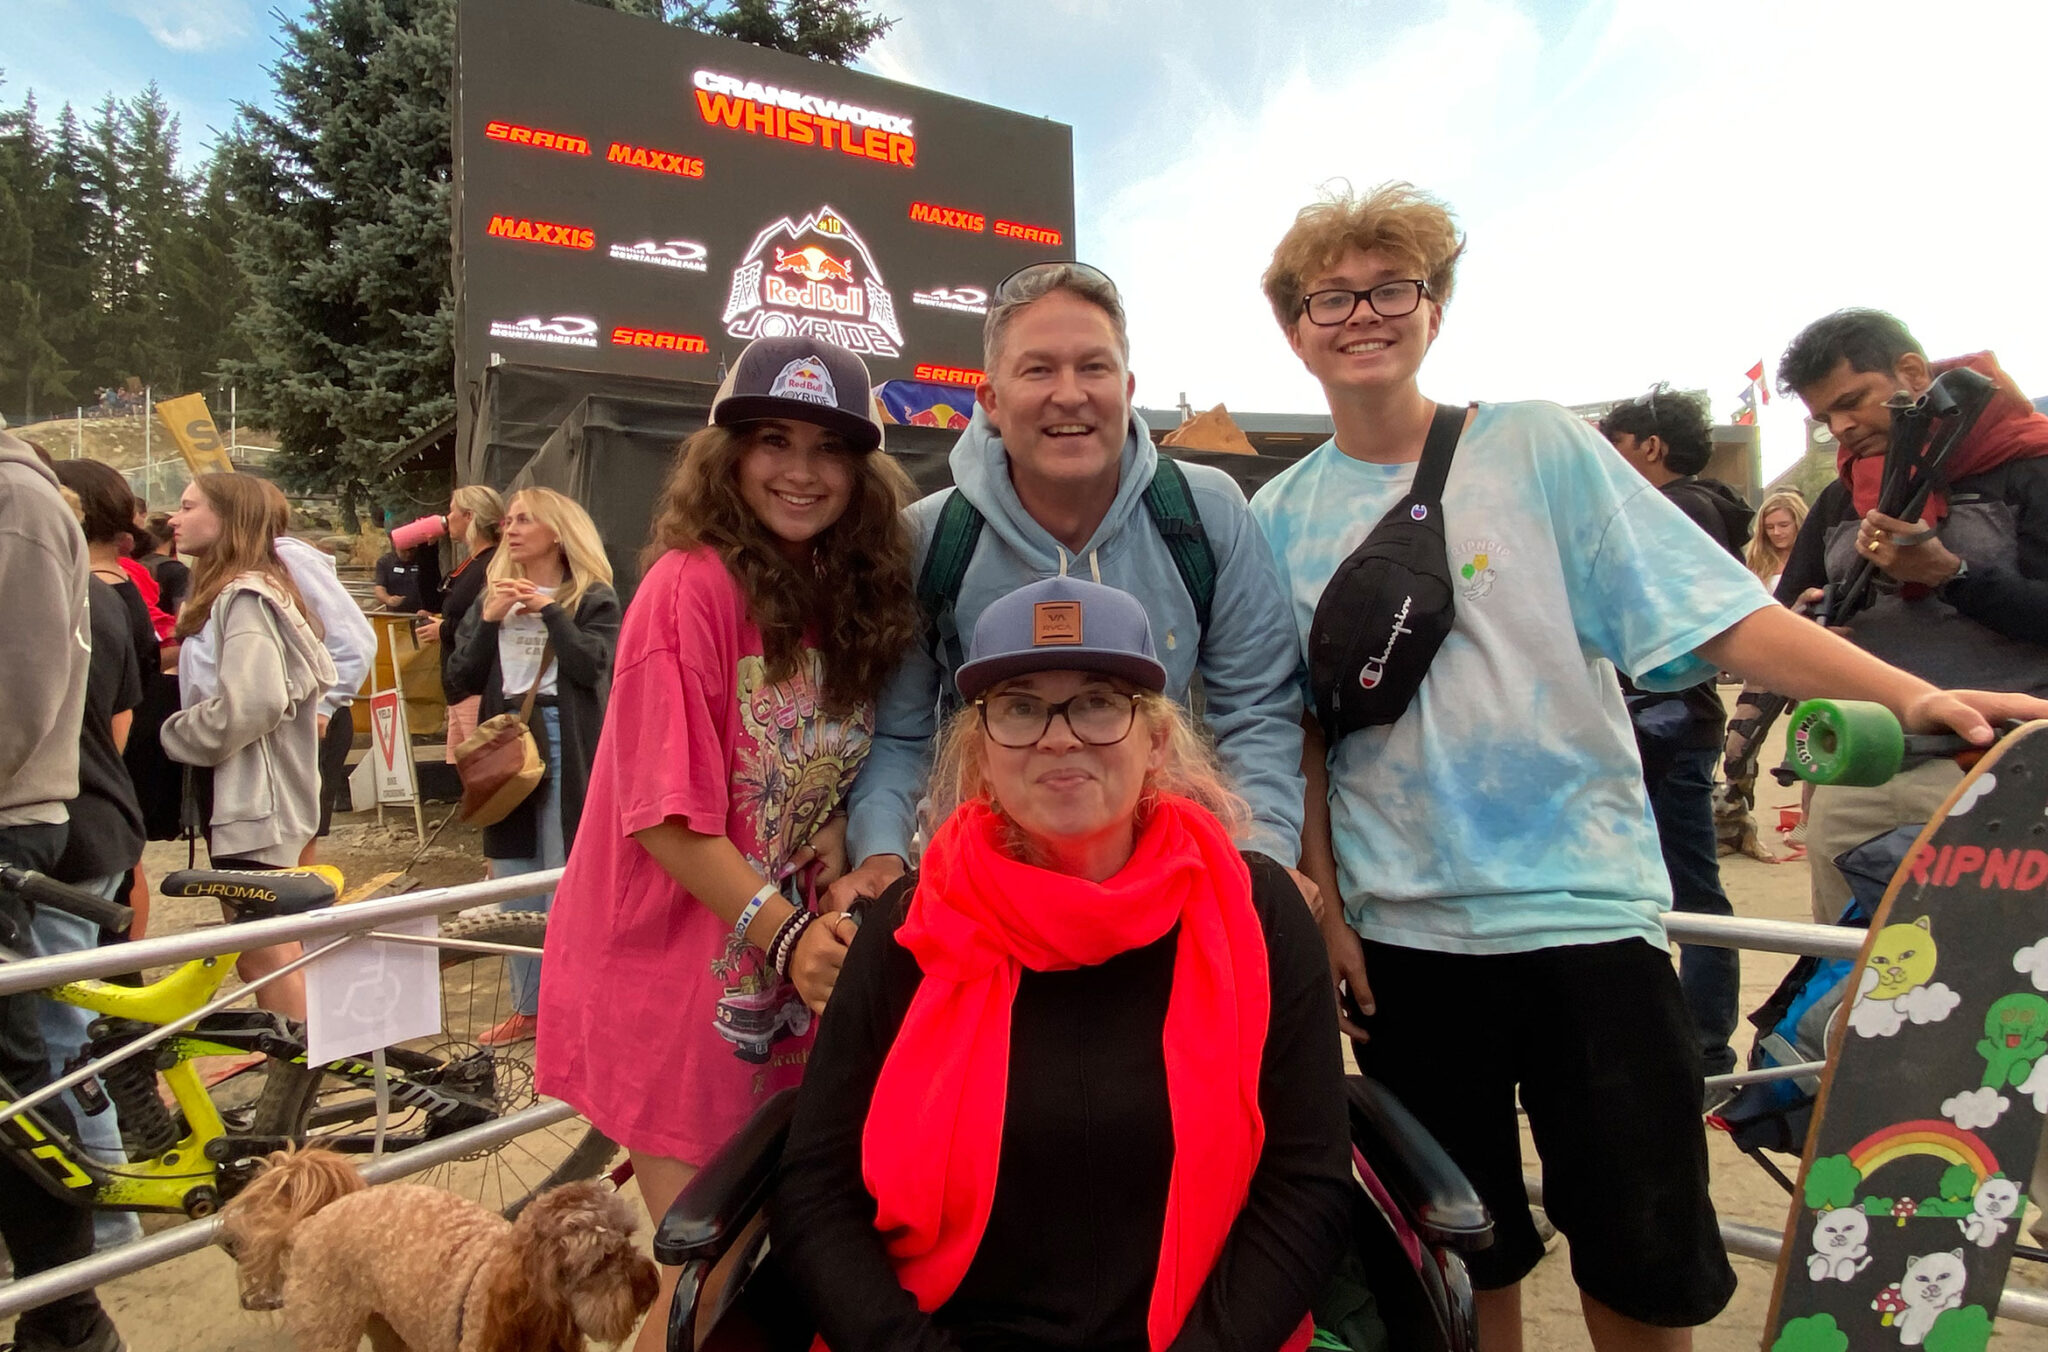 Miguel and his family pose for the camera in the accessible area to watch Red Bull Joyride, part of Crankworx Whistler.